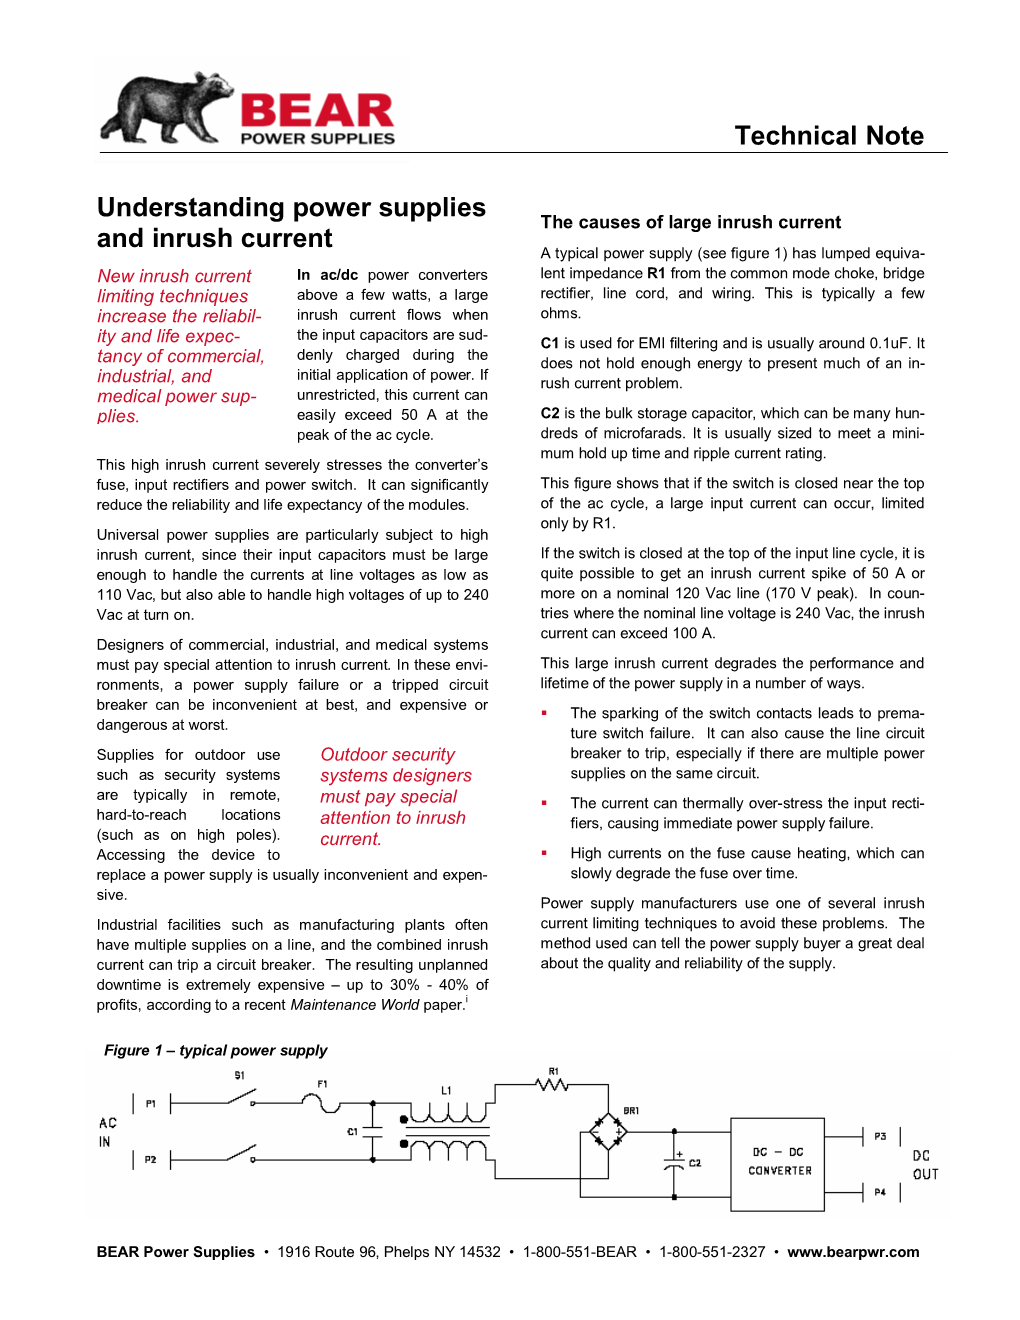 Technical Note Understanding Power Supplies and Inrush Current